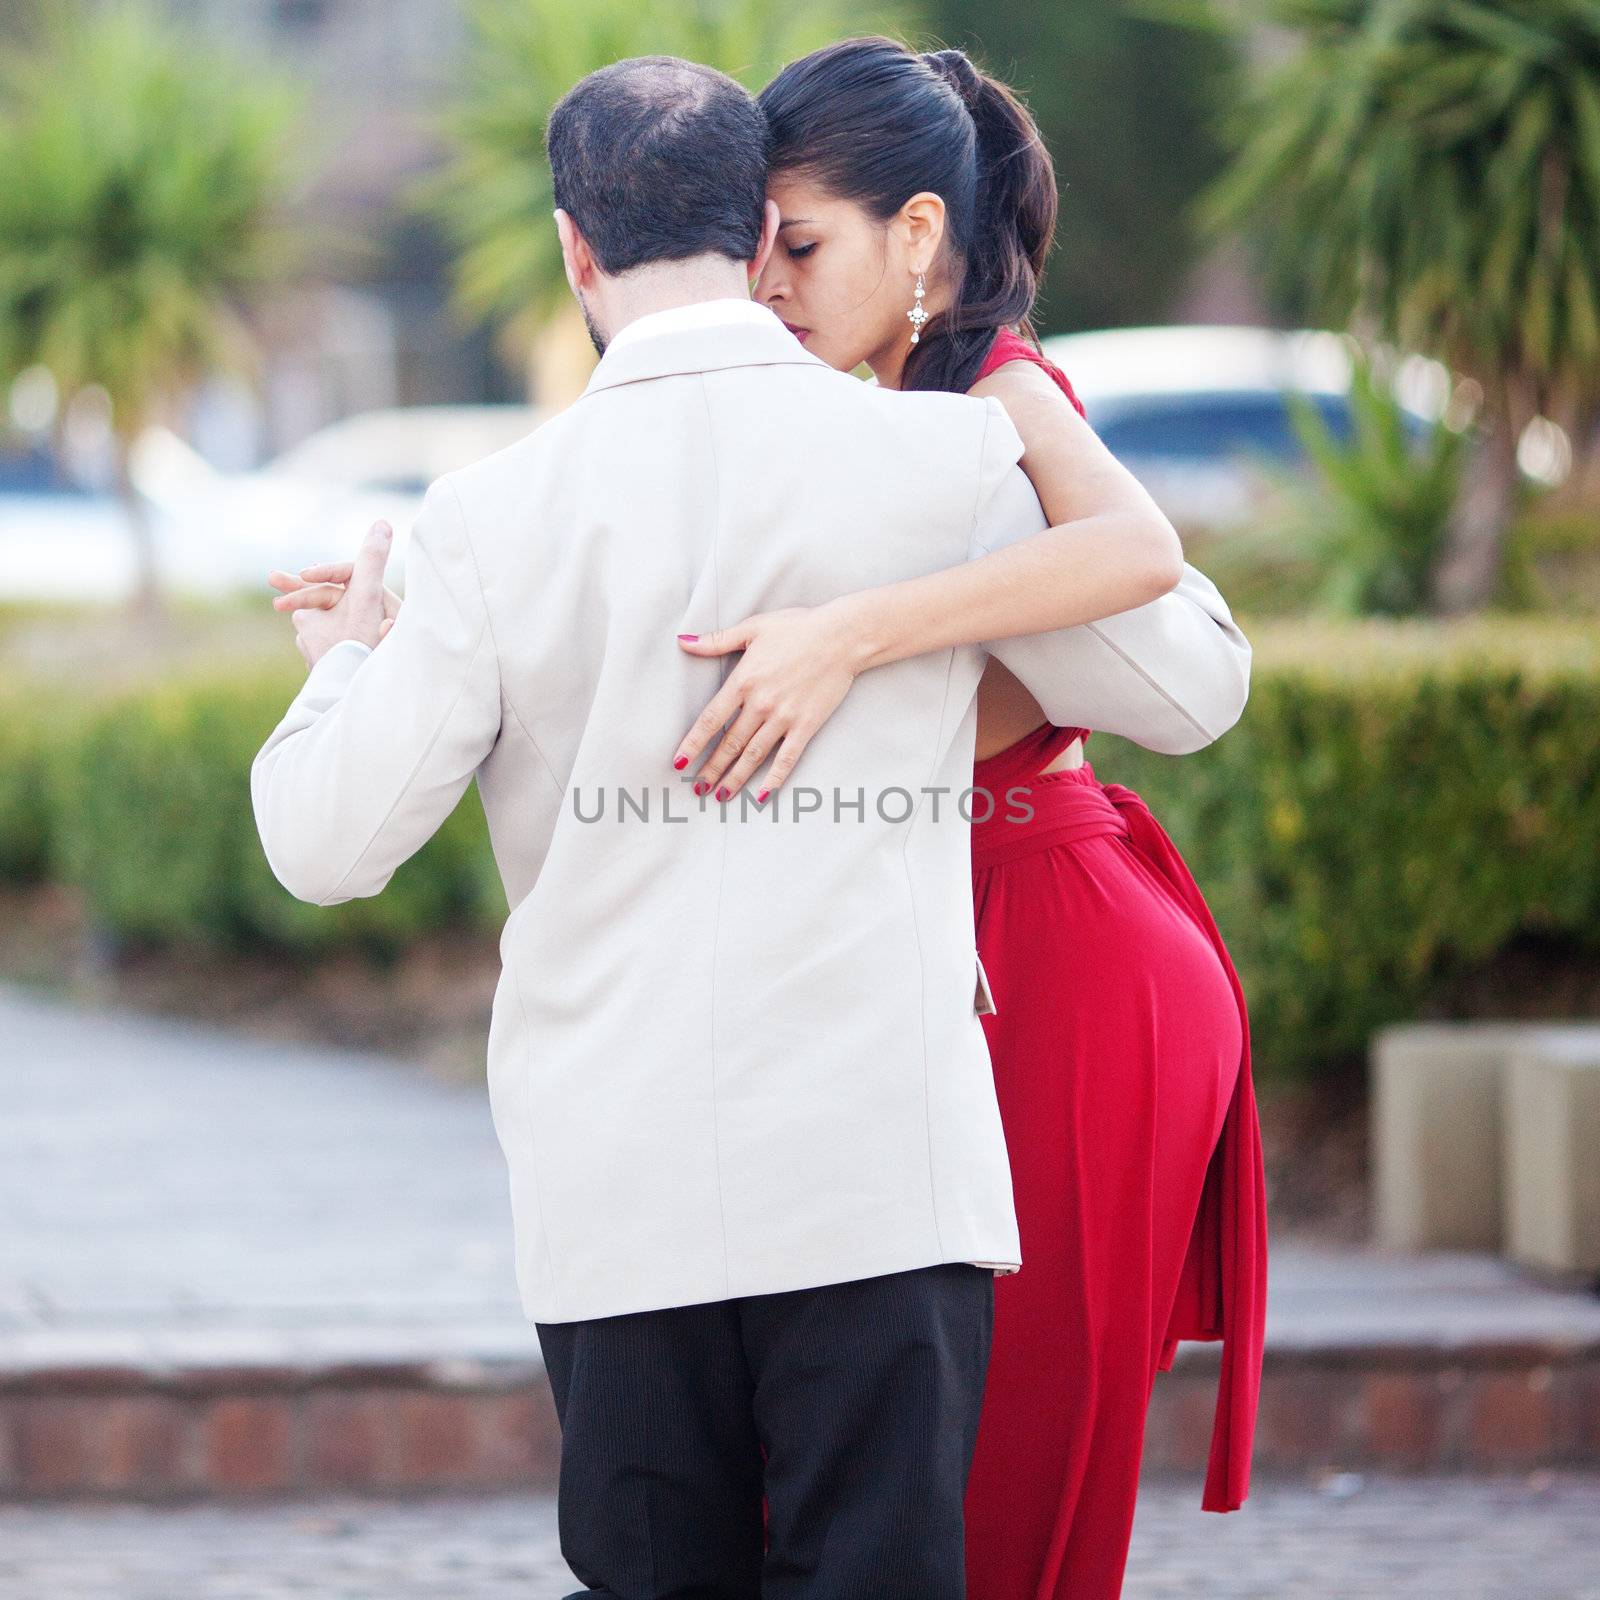 BUENOS AIRES - MAY 1: A pair of tango dancers perform on May 1, 2012  in San Telmo in Buenos Aires, Argentina.